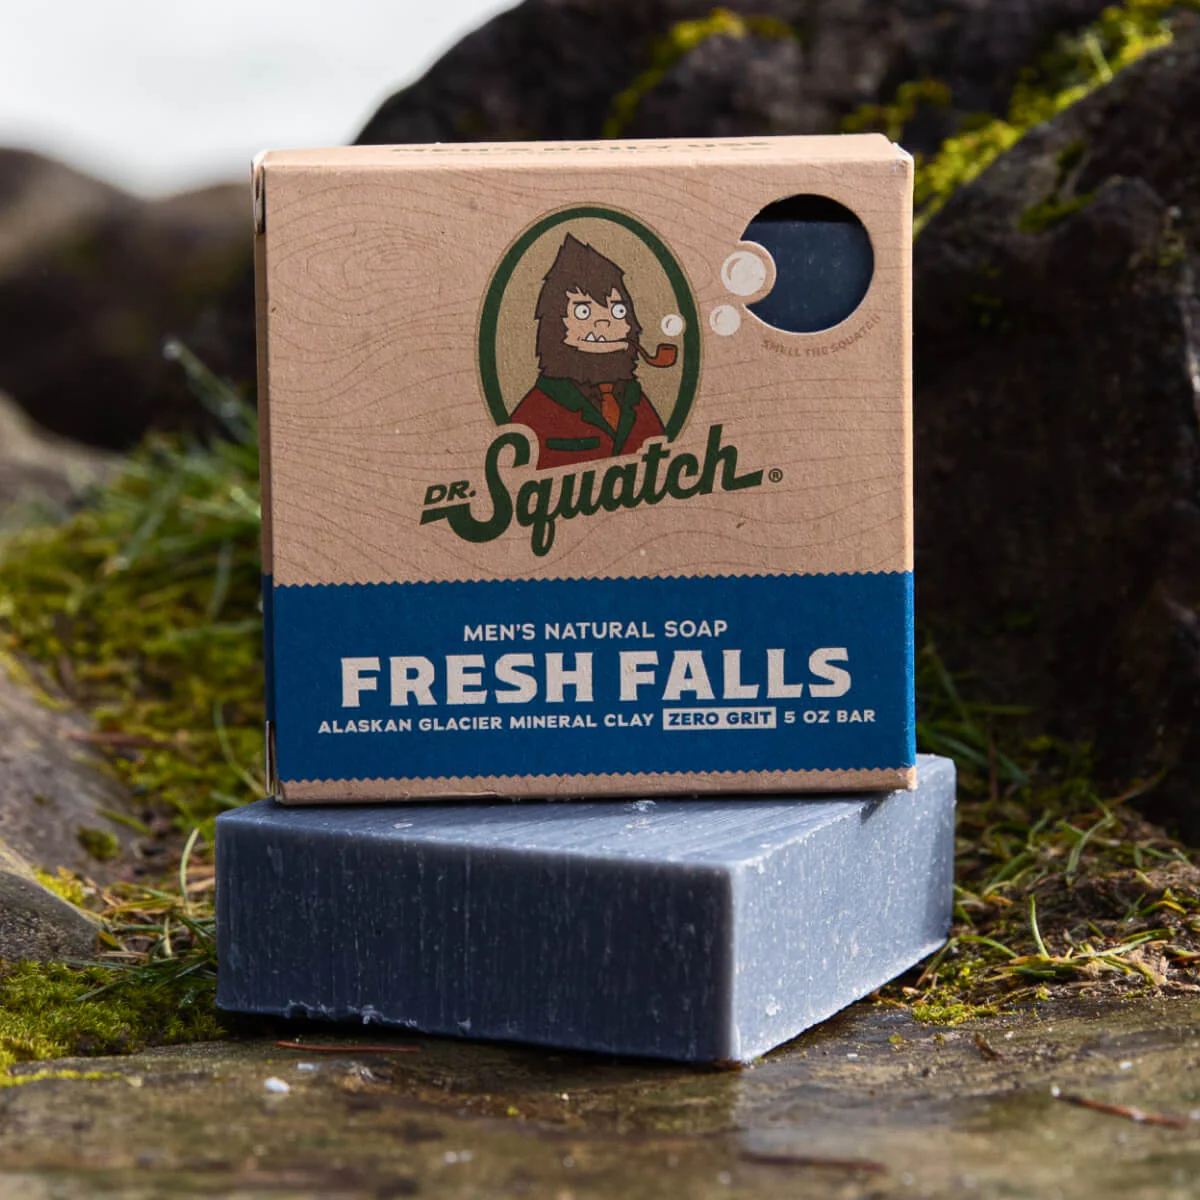 Here’s What I Thought of Dr. Squatch Soap, an Honest Review